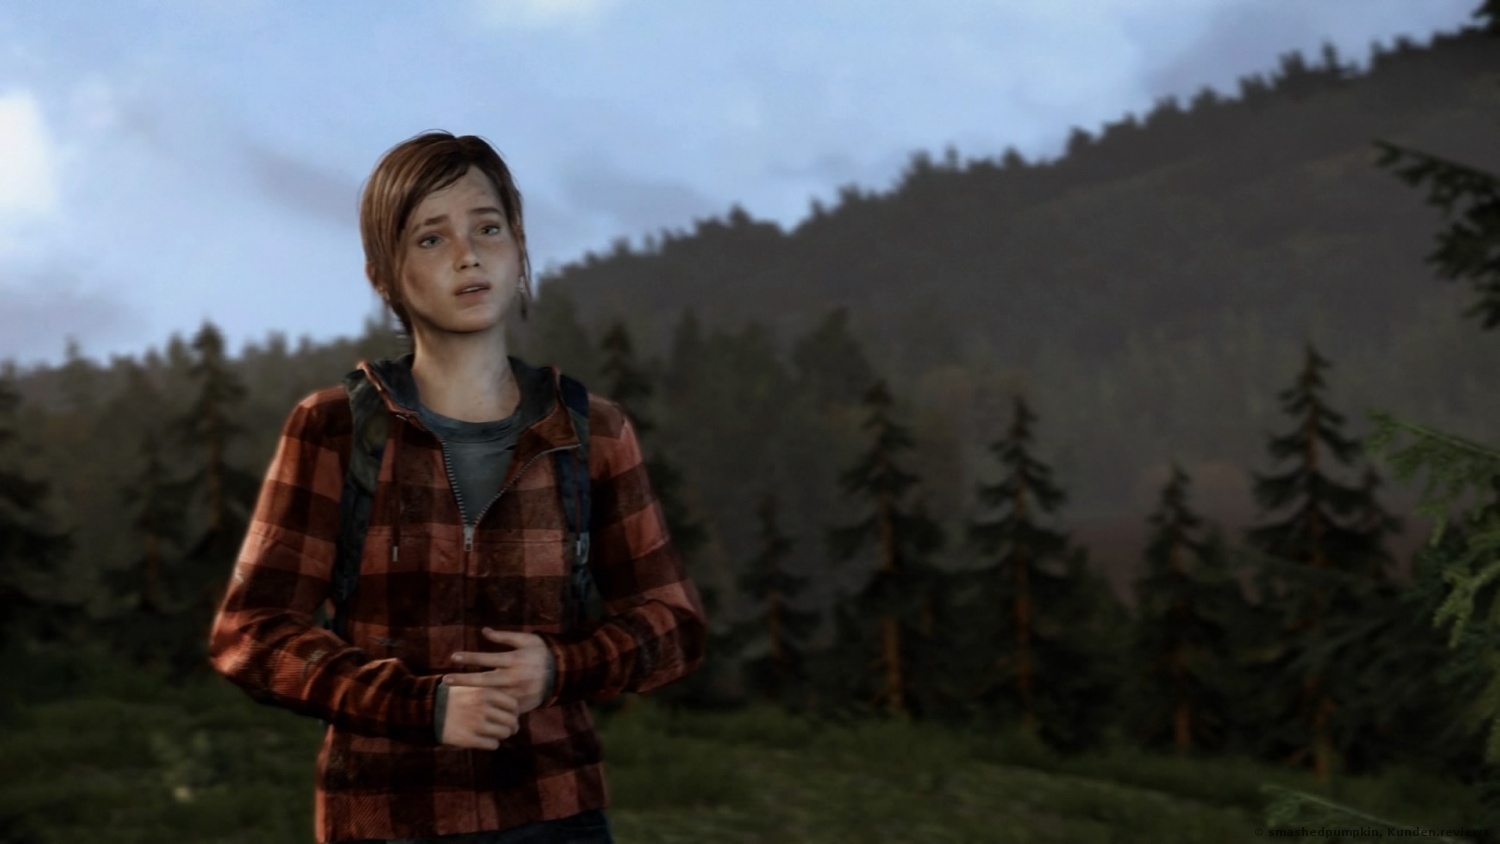 The Last Of Us Remastered [PlayStation 4] Foto